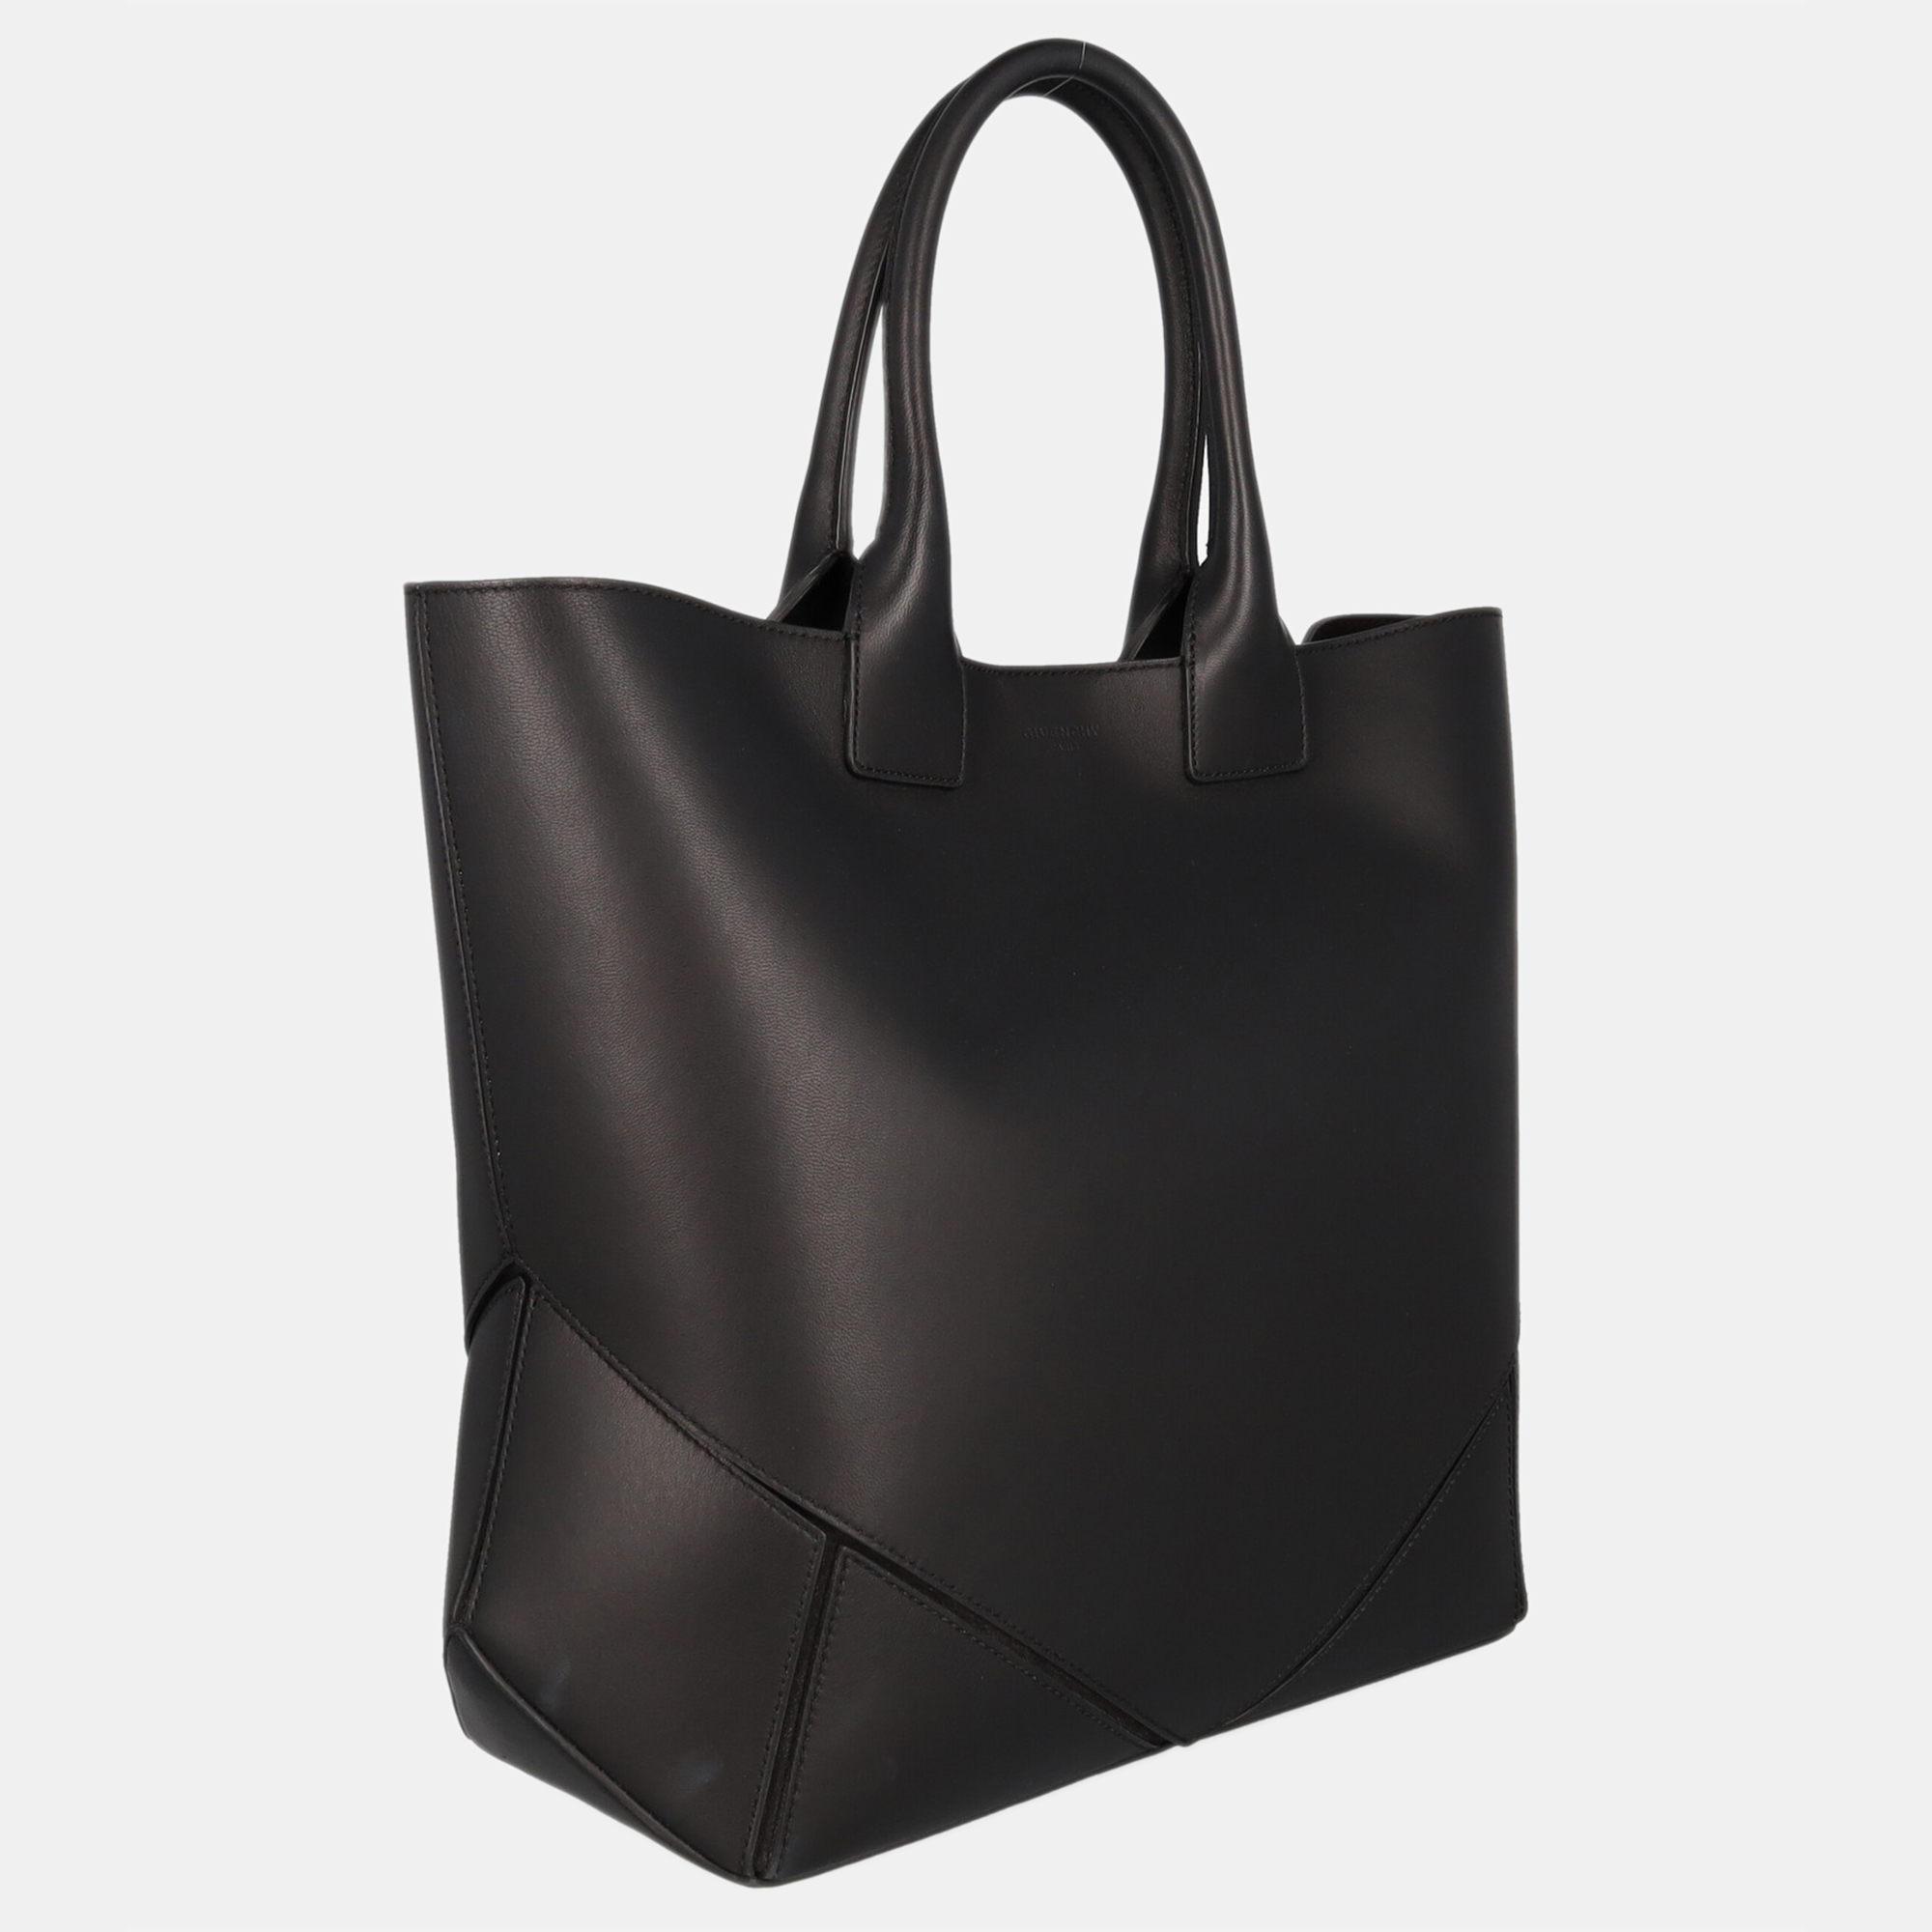 Givenchy  Women's Leather Tote Bag - Black - One Size